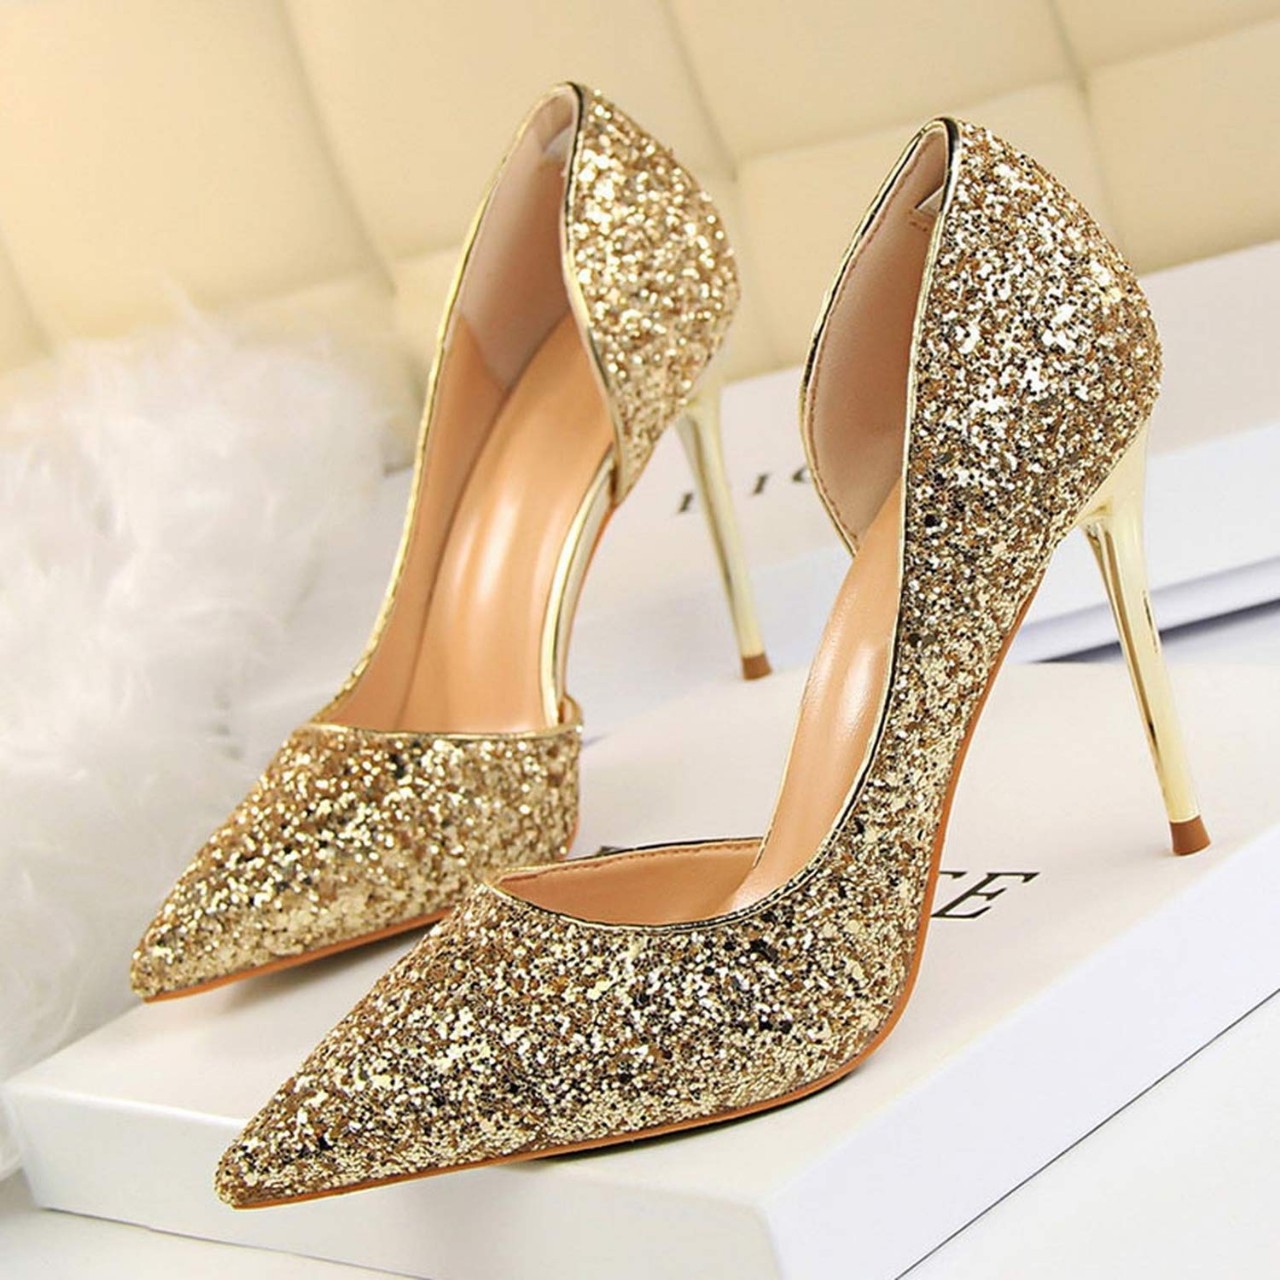 The Hot Rock Women Pumps Extrem Sexy High Heels Women Shoes Thin Heels Female Shoes Wedding Shoes